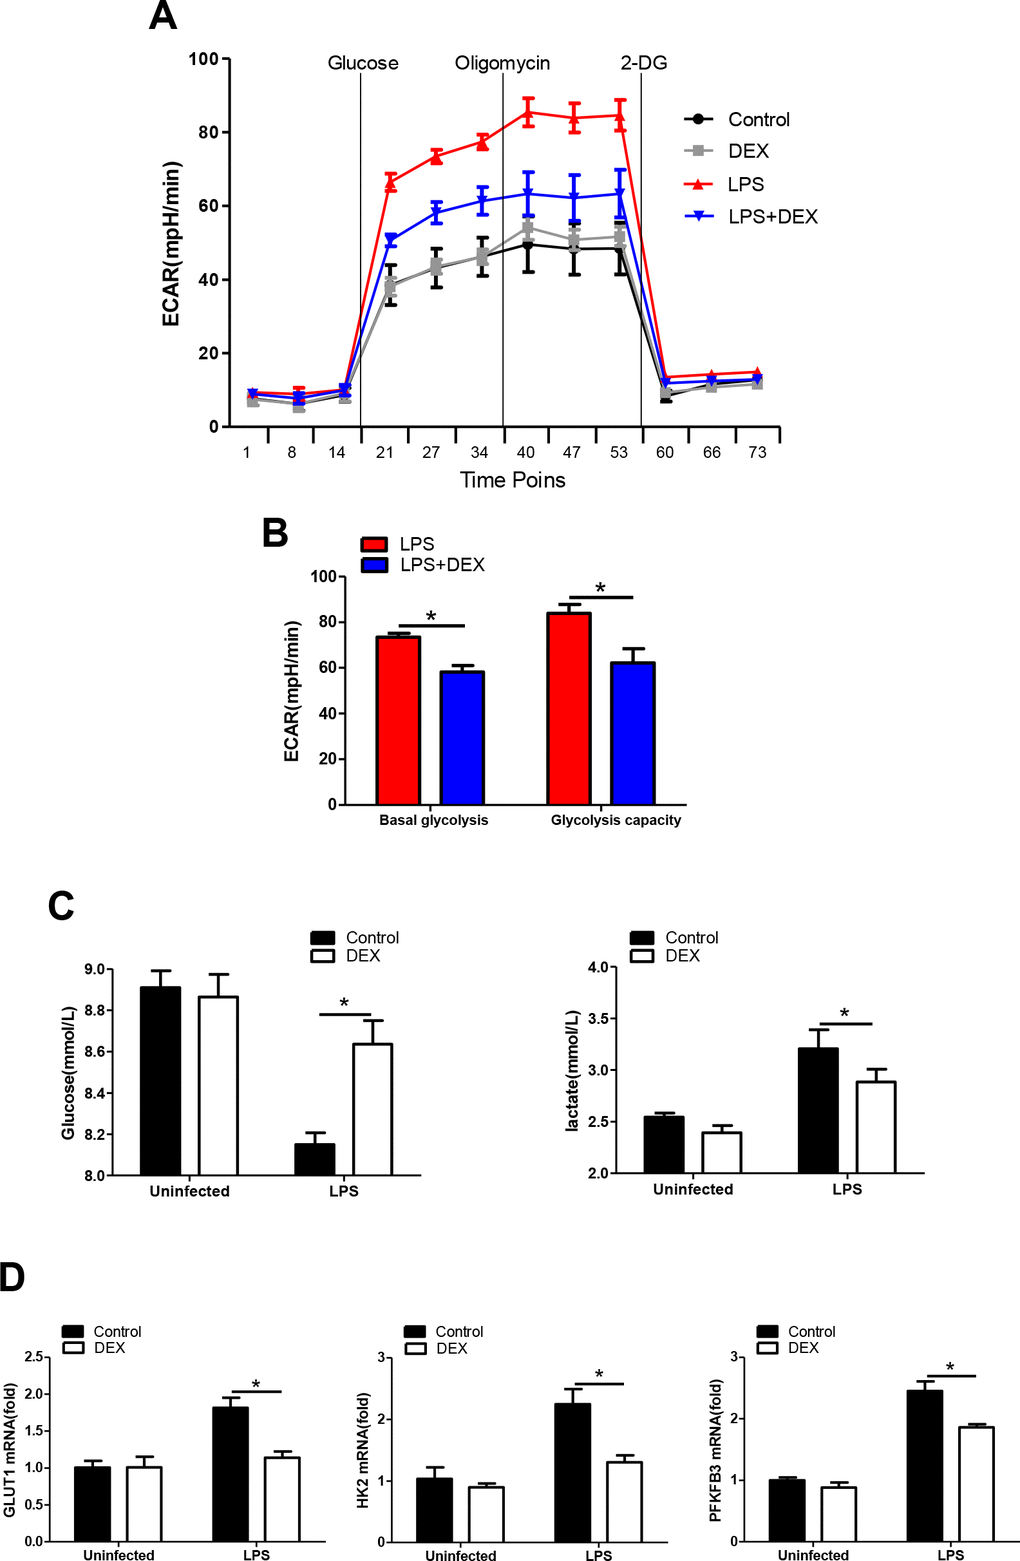 DEX inhibits glycolysis in LPS-treated macrophages. (A and B) BMDMs were seeded in Seahorse XFe96 cell culture microplates and treated with 100 ng/ml LPS and 1 μM DEX for 4 h. The real-time ECAR was recorded, and basal glycolysis and glycolytic capacity values were plotted. n = 5; mean ± SEM; * P C) BMDMs were treated with 100 ng/ml LPS and 1 μM DEX for 4 h. Supernatants were collected, and the levels of glucose and lactate were measured. n = 3; mean ±SEM; * P D) BMDMs were treated with 100 ng/ml LPS and 1 μM DEX for 4 h. The mRNA levels of GLUT1, HK2 and PFKFB3 were determined by RT-PCR. n = 3; mean ± SEM; * P 